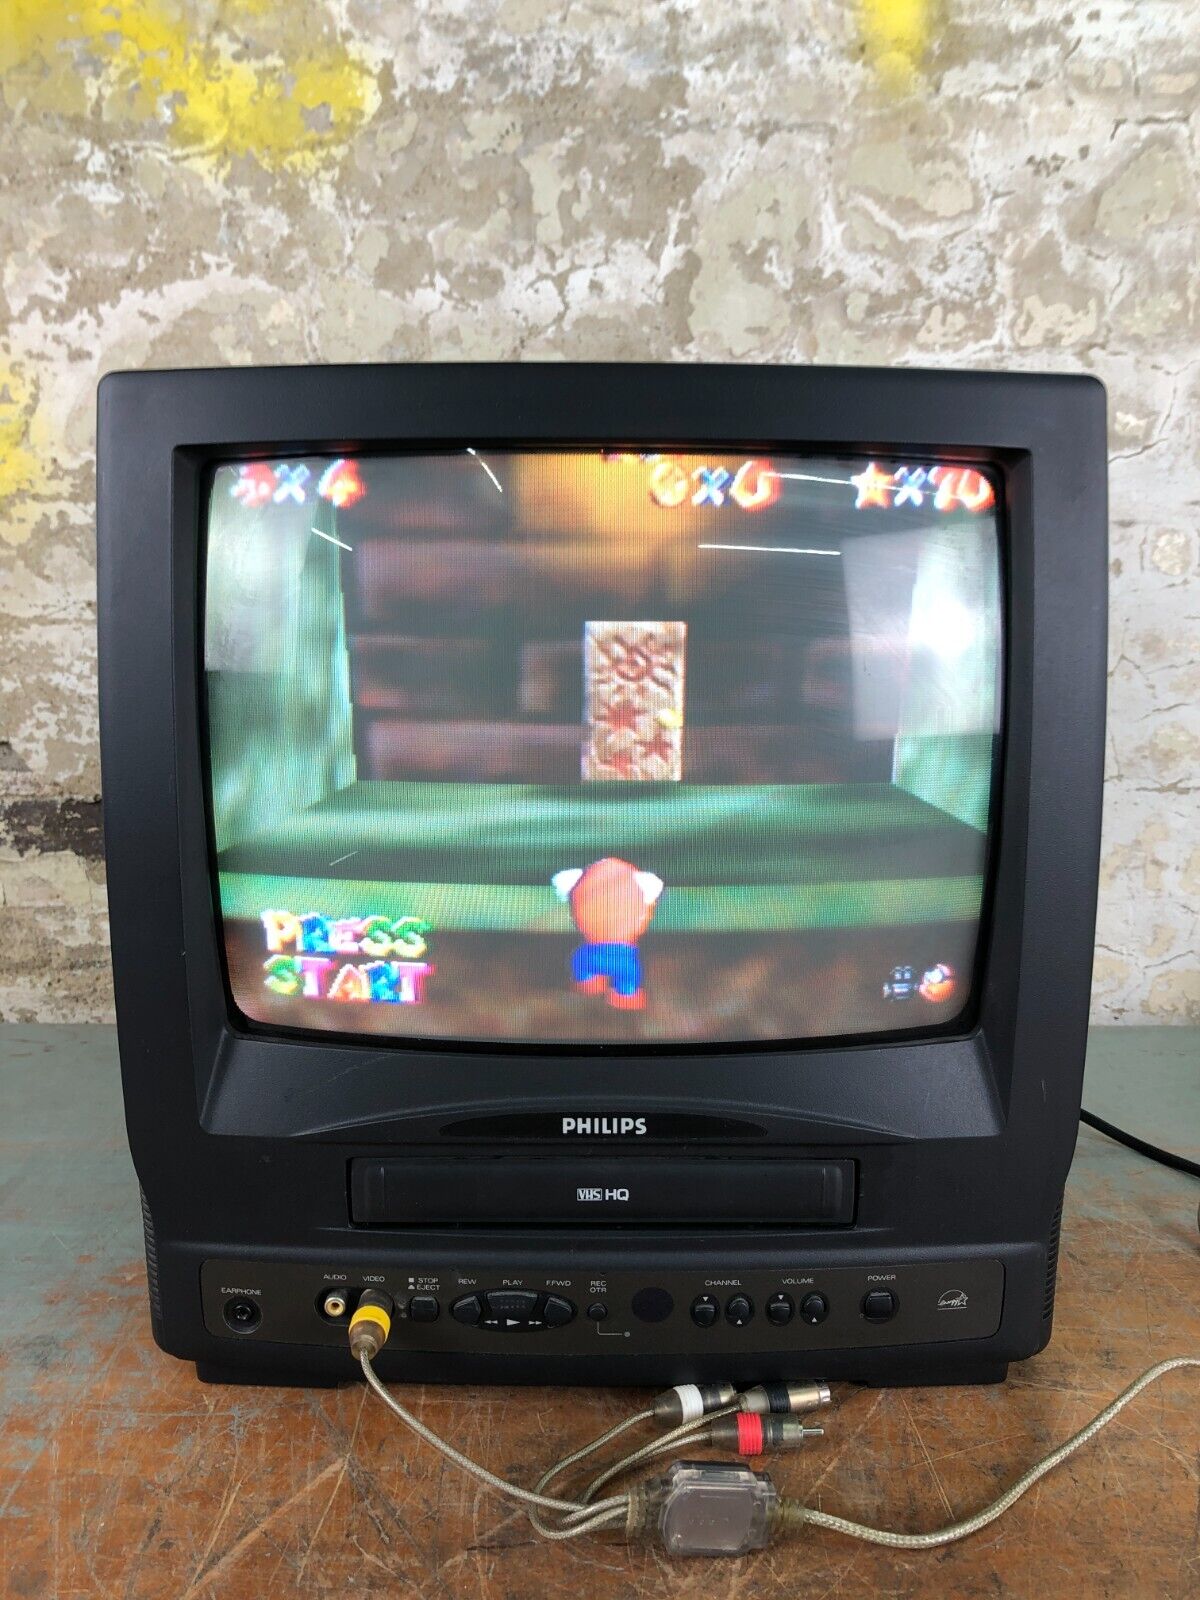 PHILIPS 13” CRT Color TV/VCR Combo CCC130AT01 Retro Gaming -  WORKS GREAT